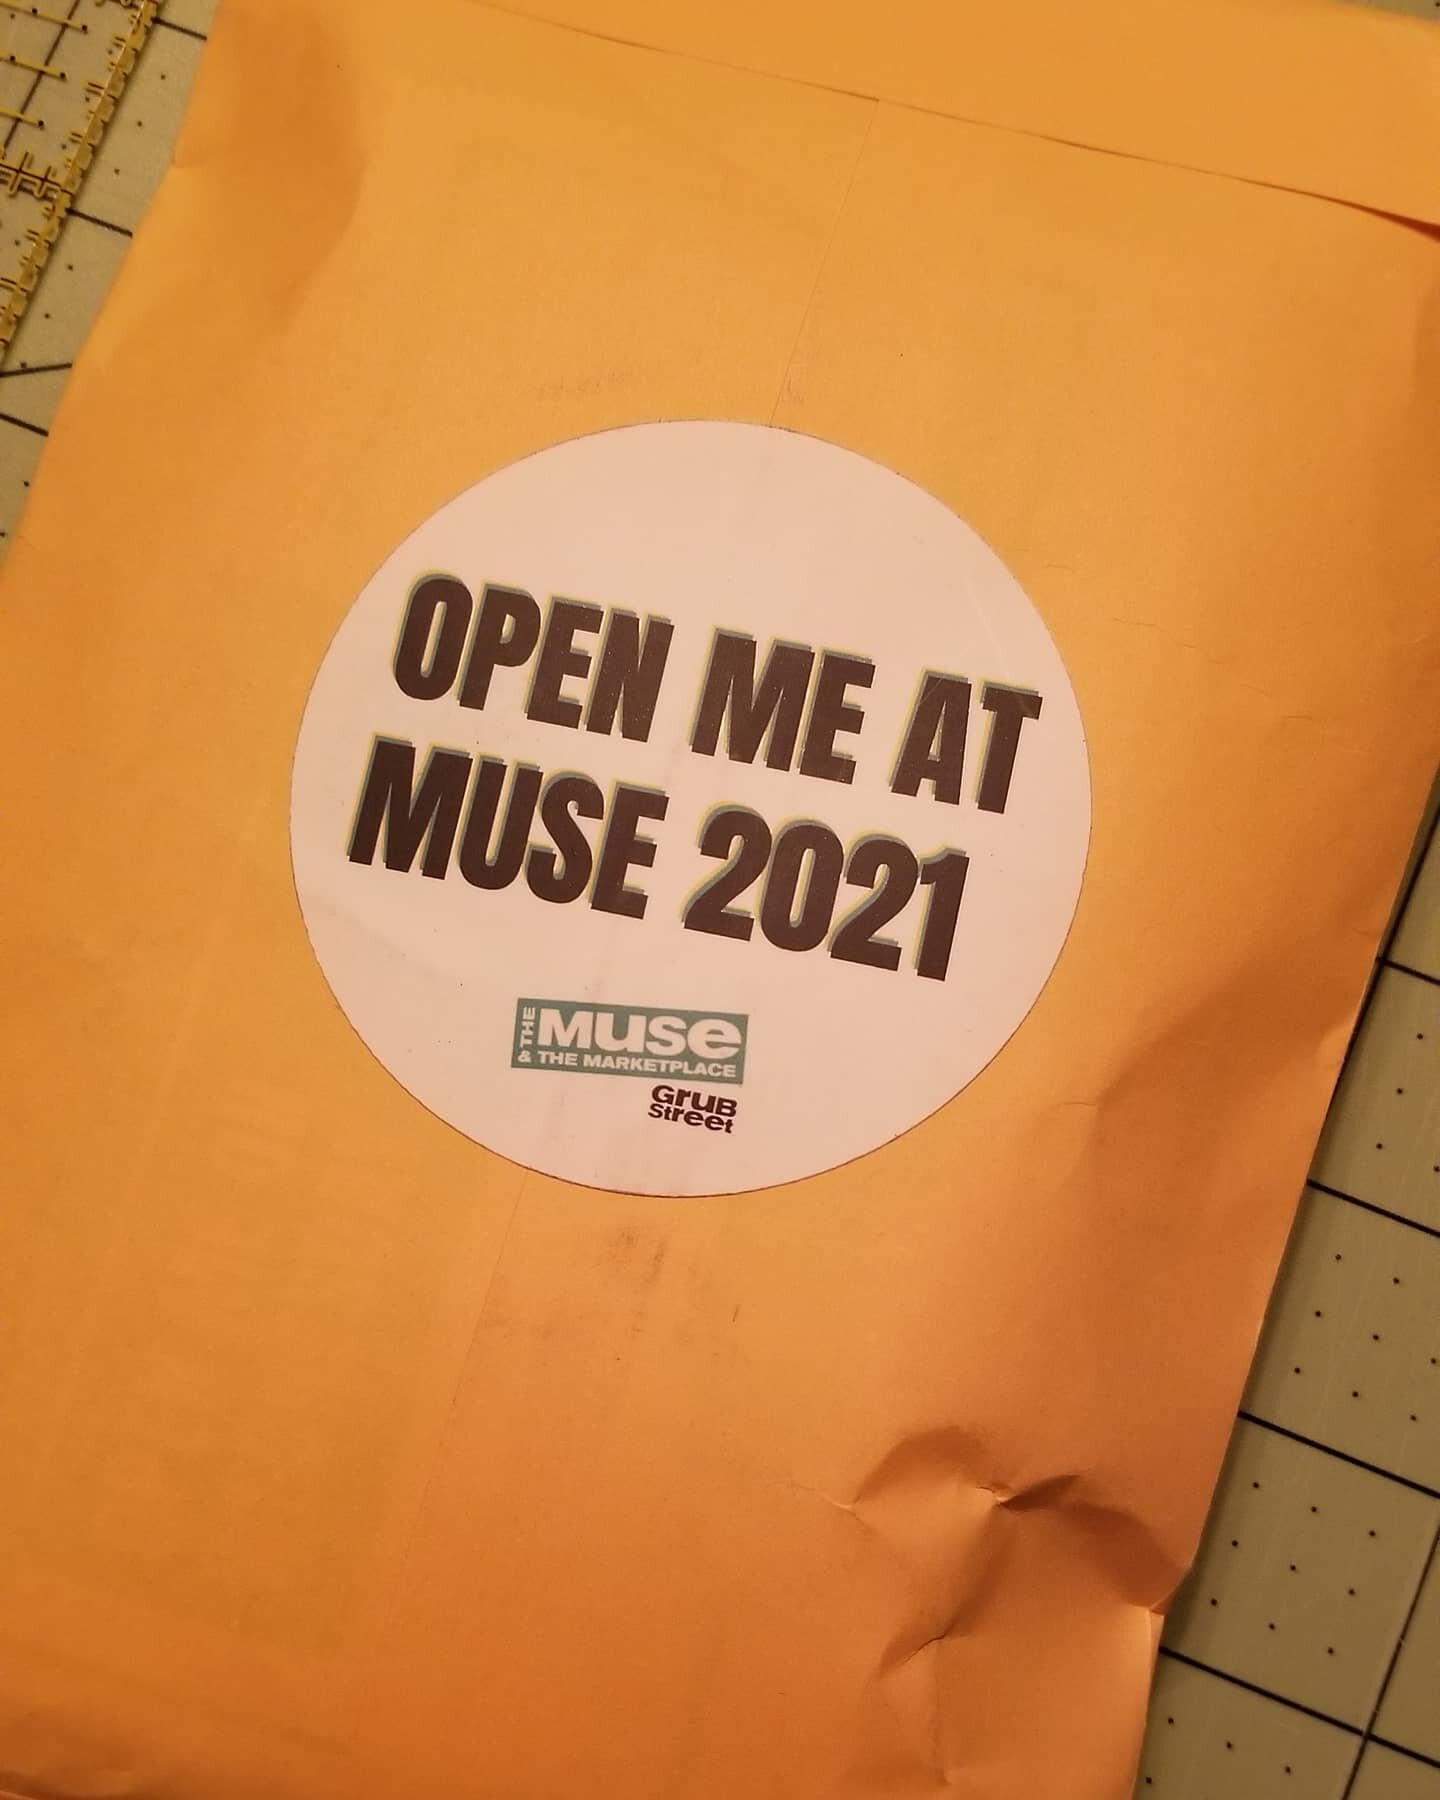 Just a few more hours until I open this!

#Muse21 #bostonwriters